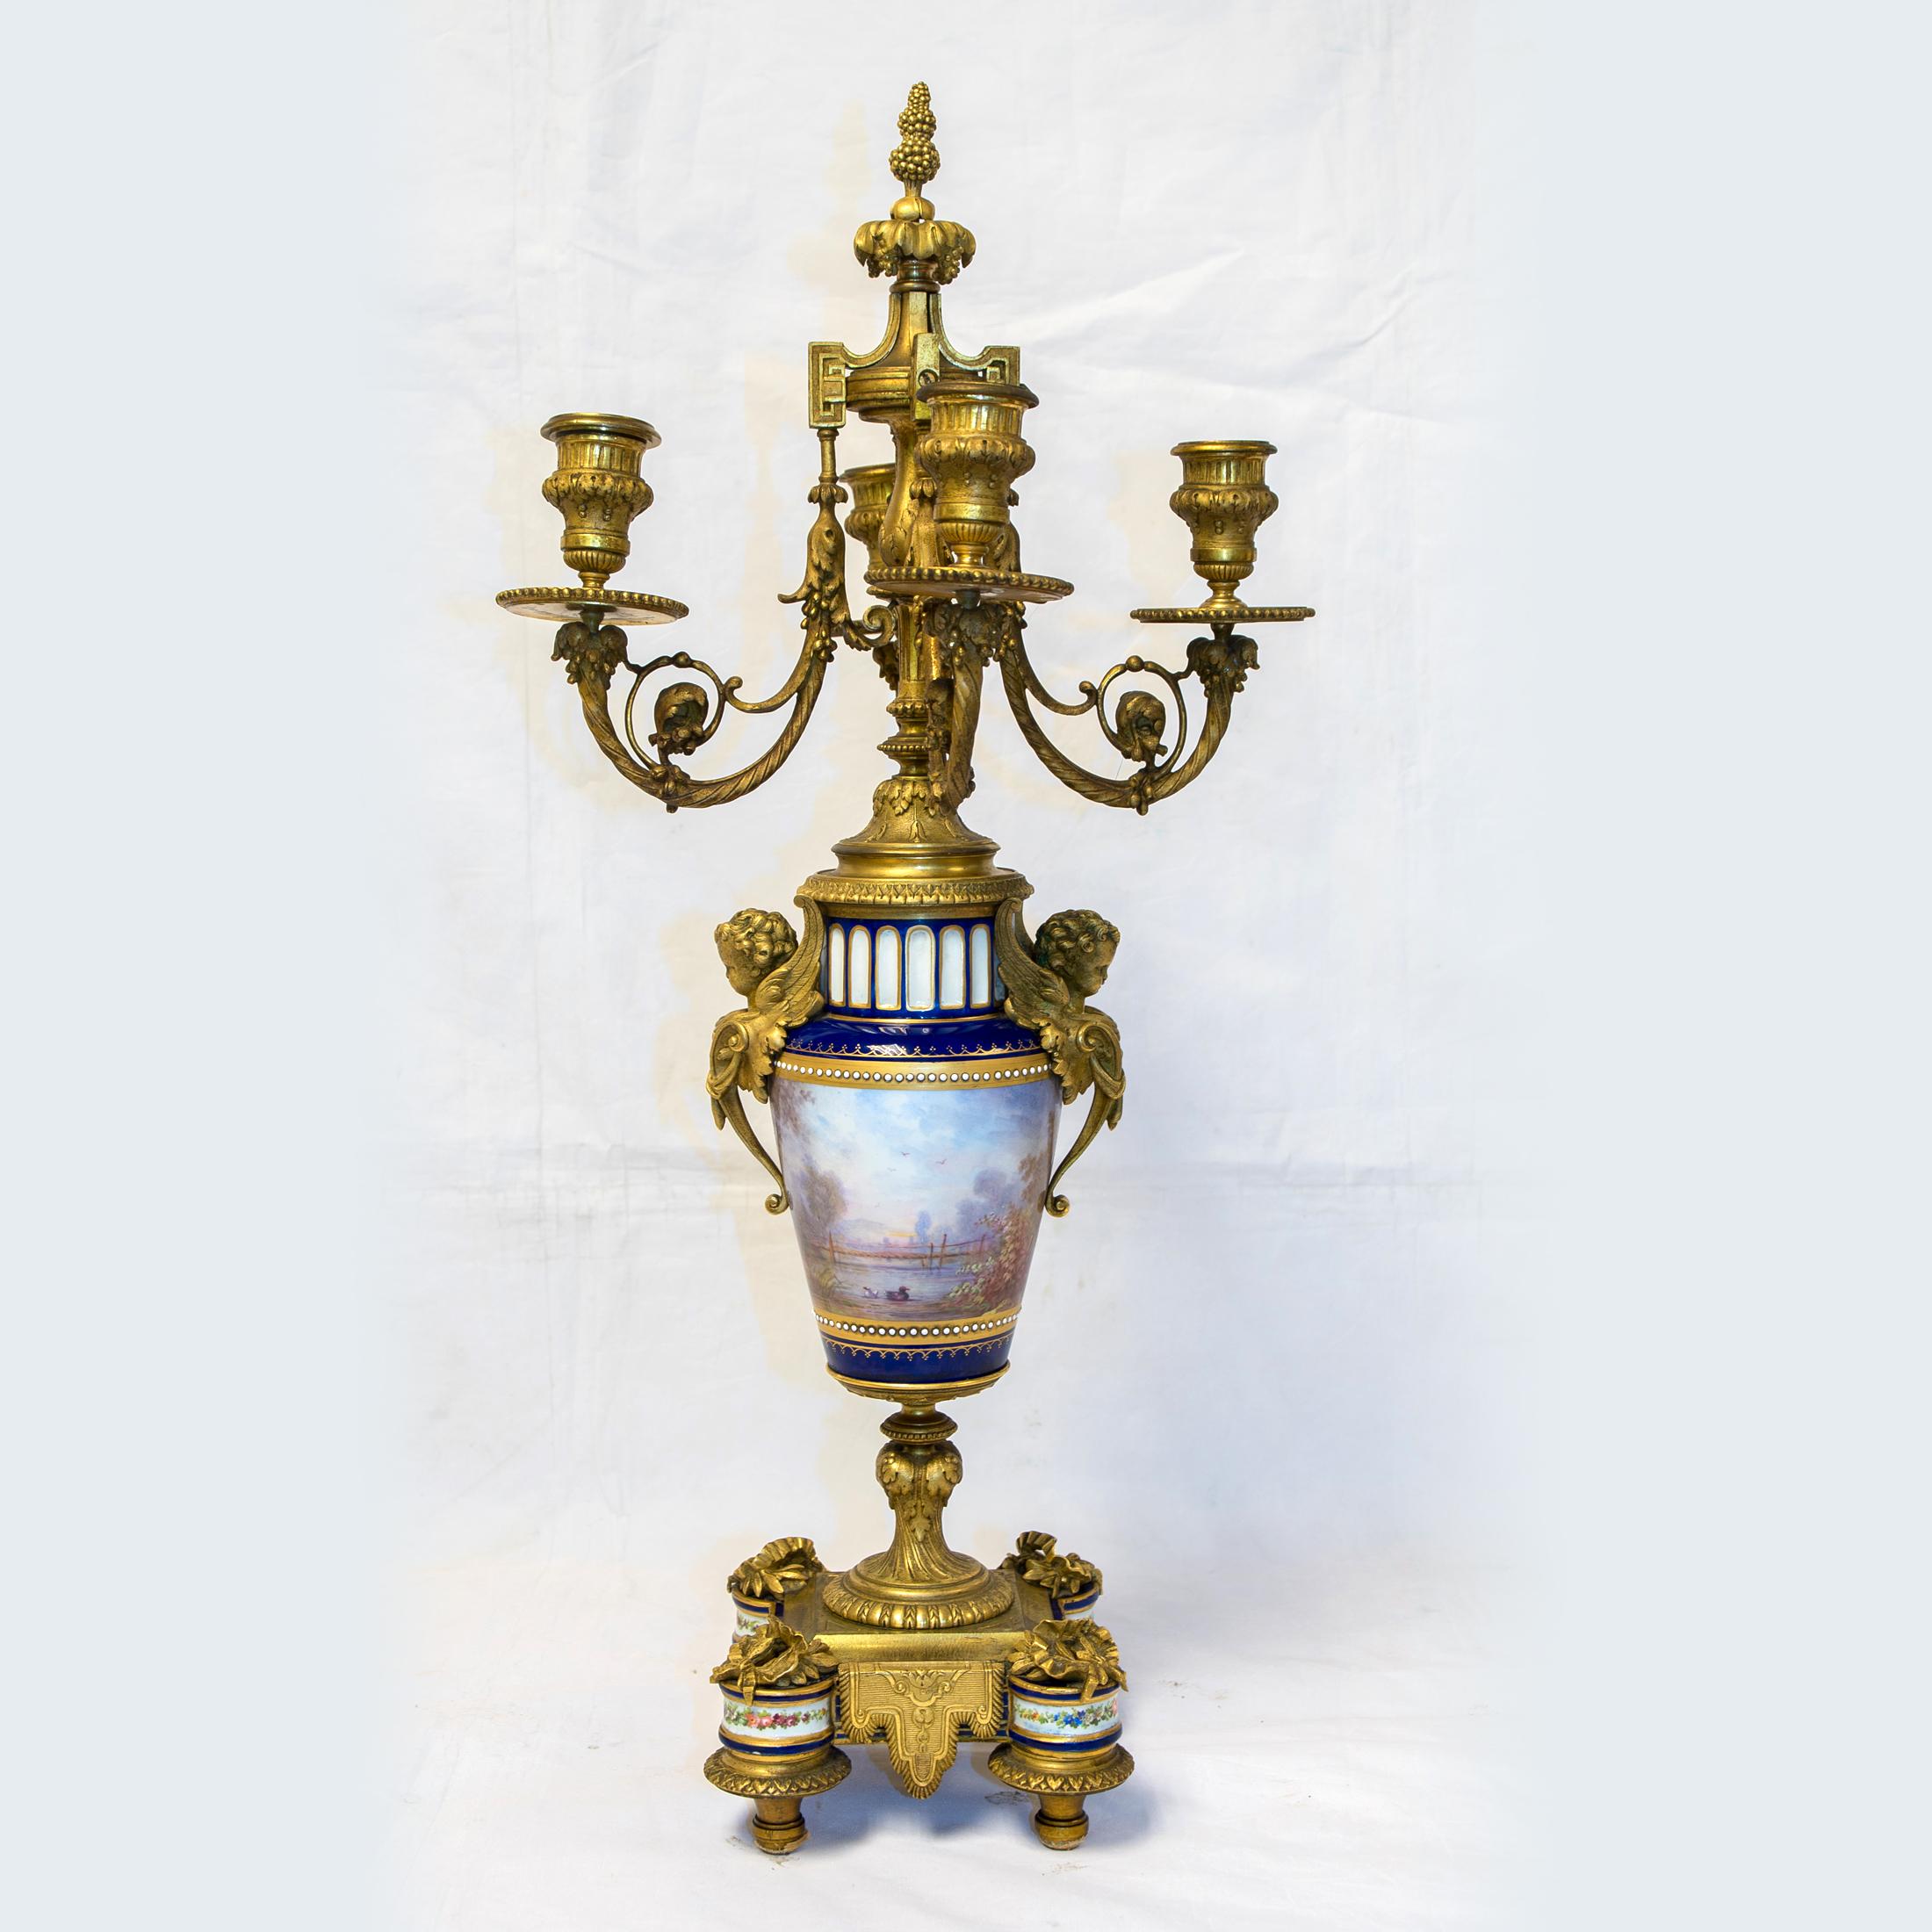 Rare Pair of Four-Branch Gilt Bronze & Jeweled Sèvres Style Porcelain Candelabra In Good Condition For Sale In New York, NY